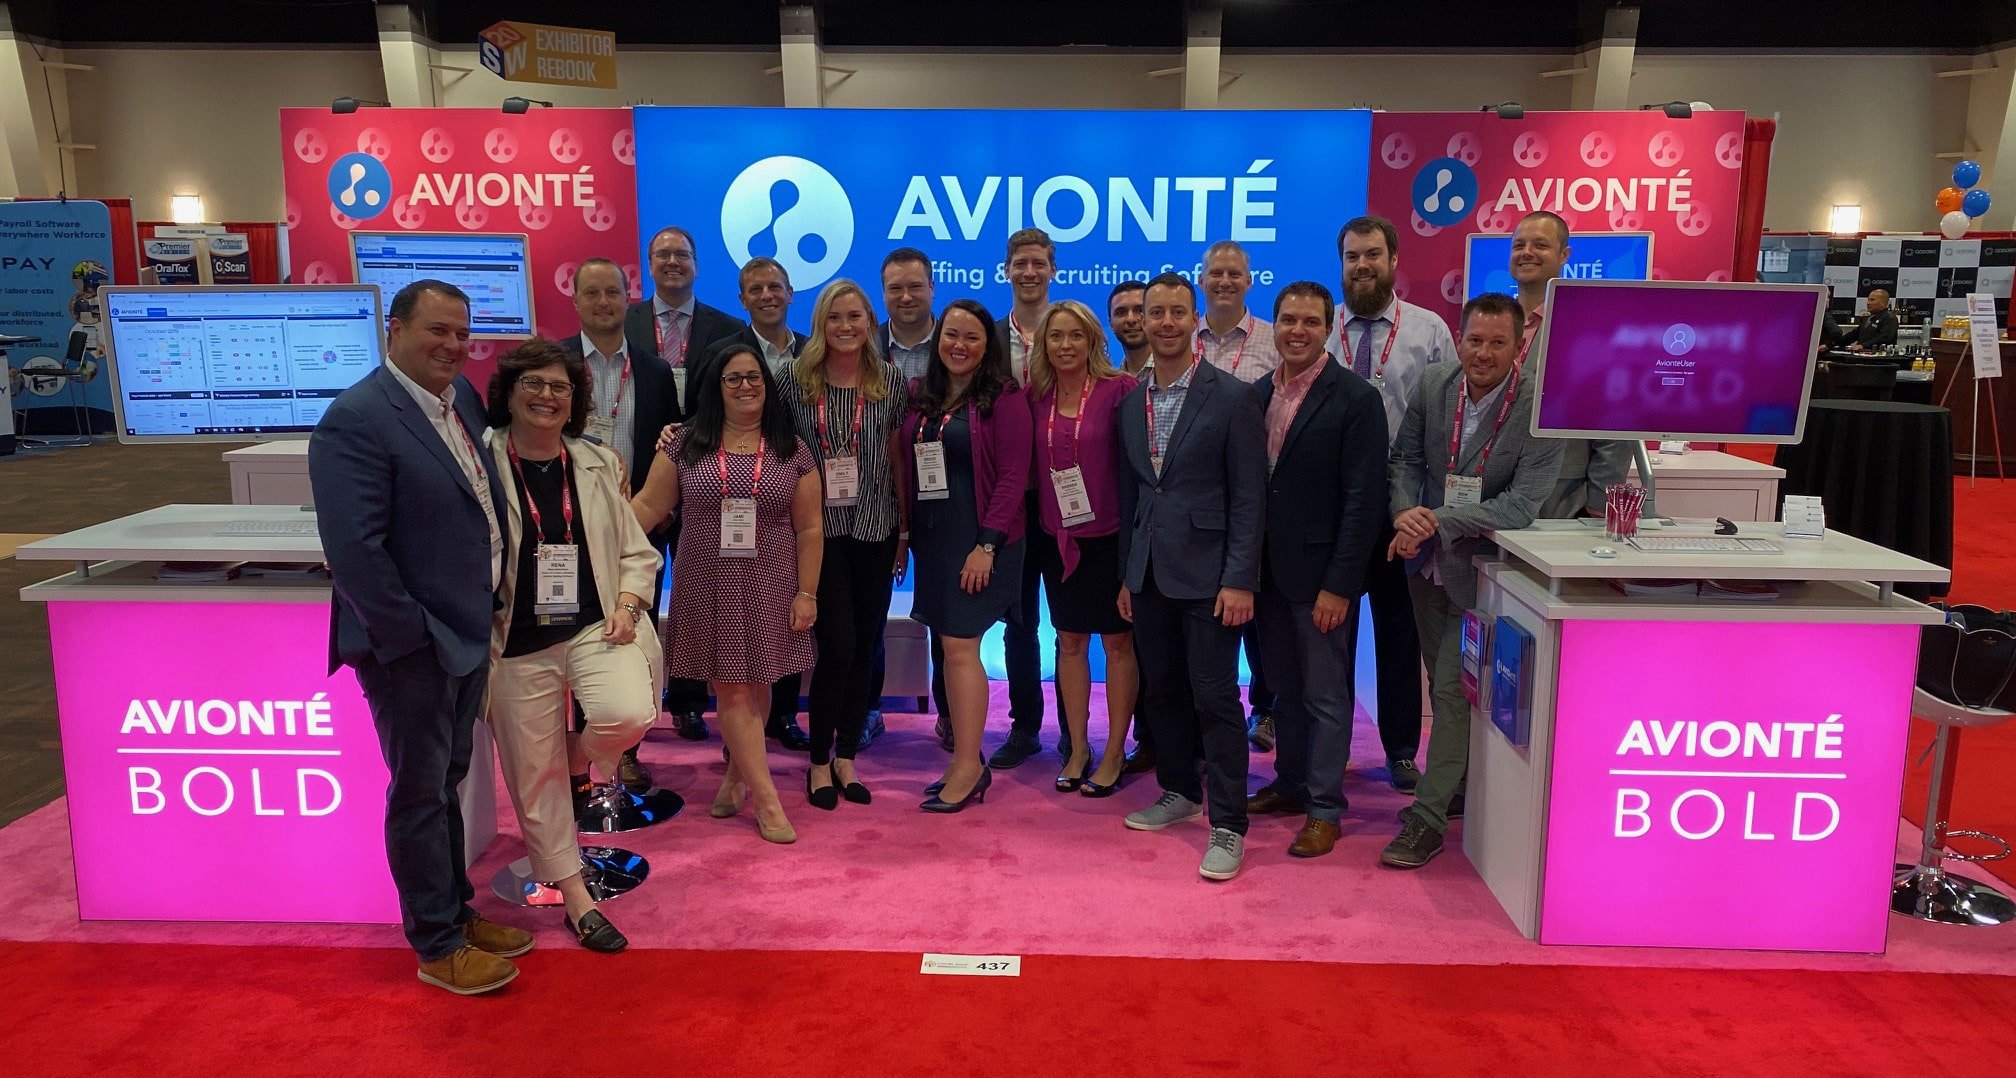 Picture of Avionte staff at Staffing World 2019